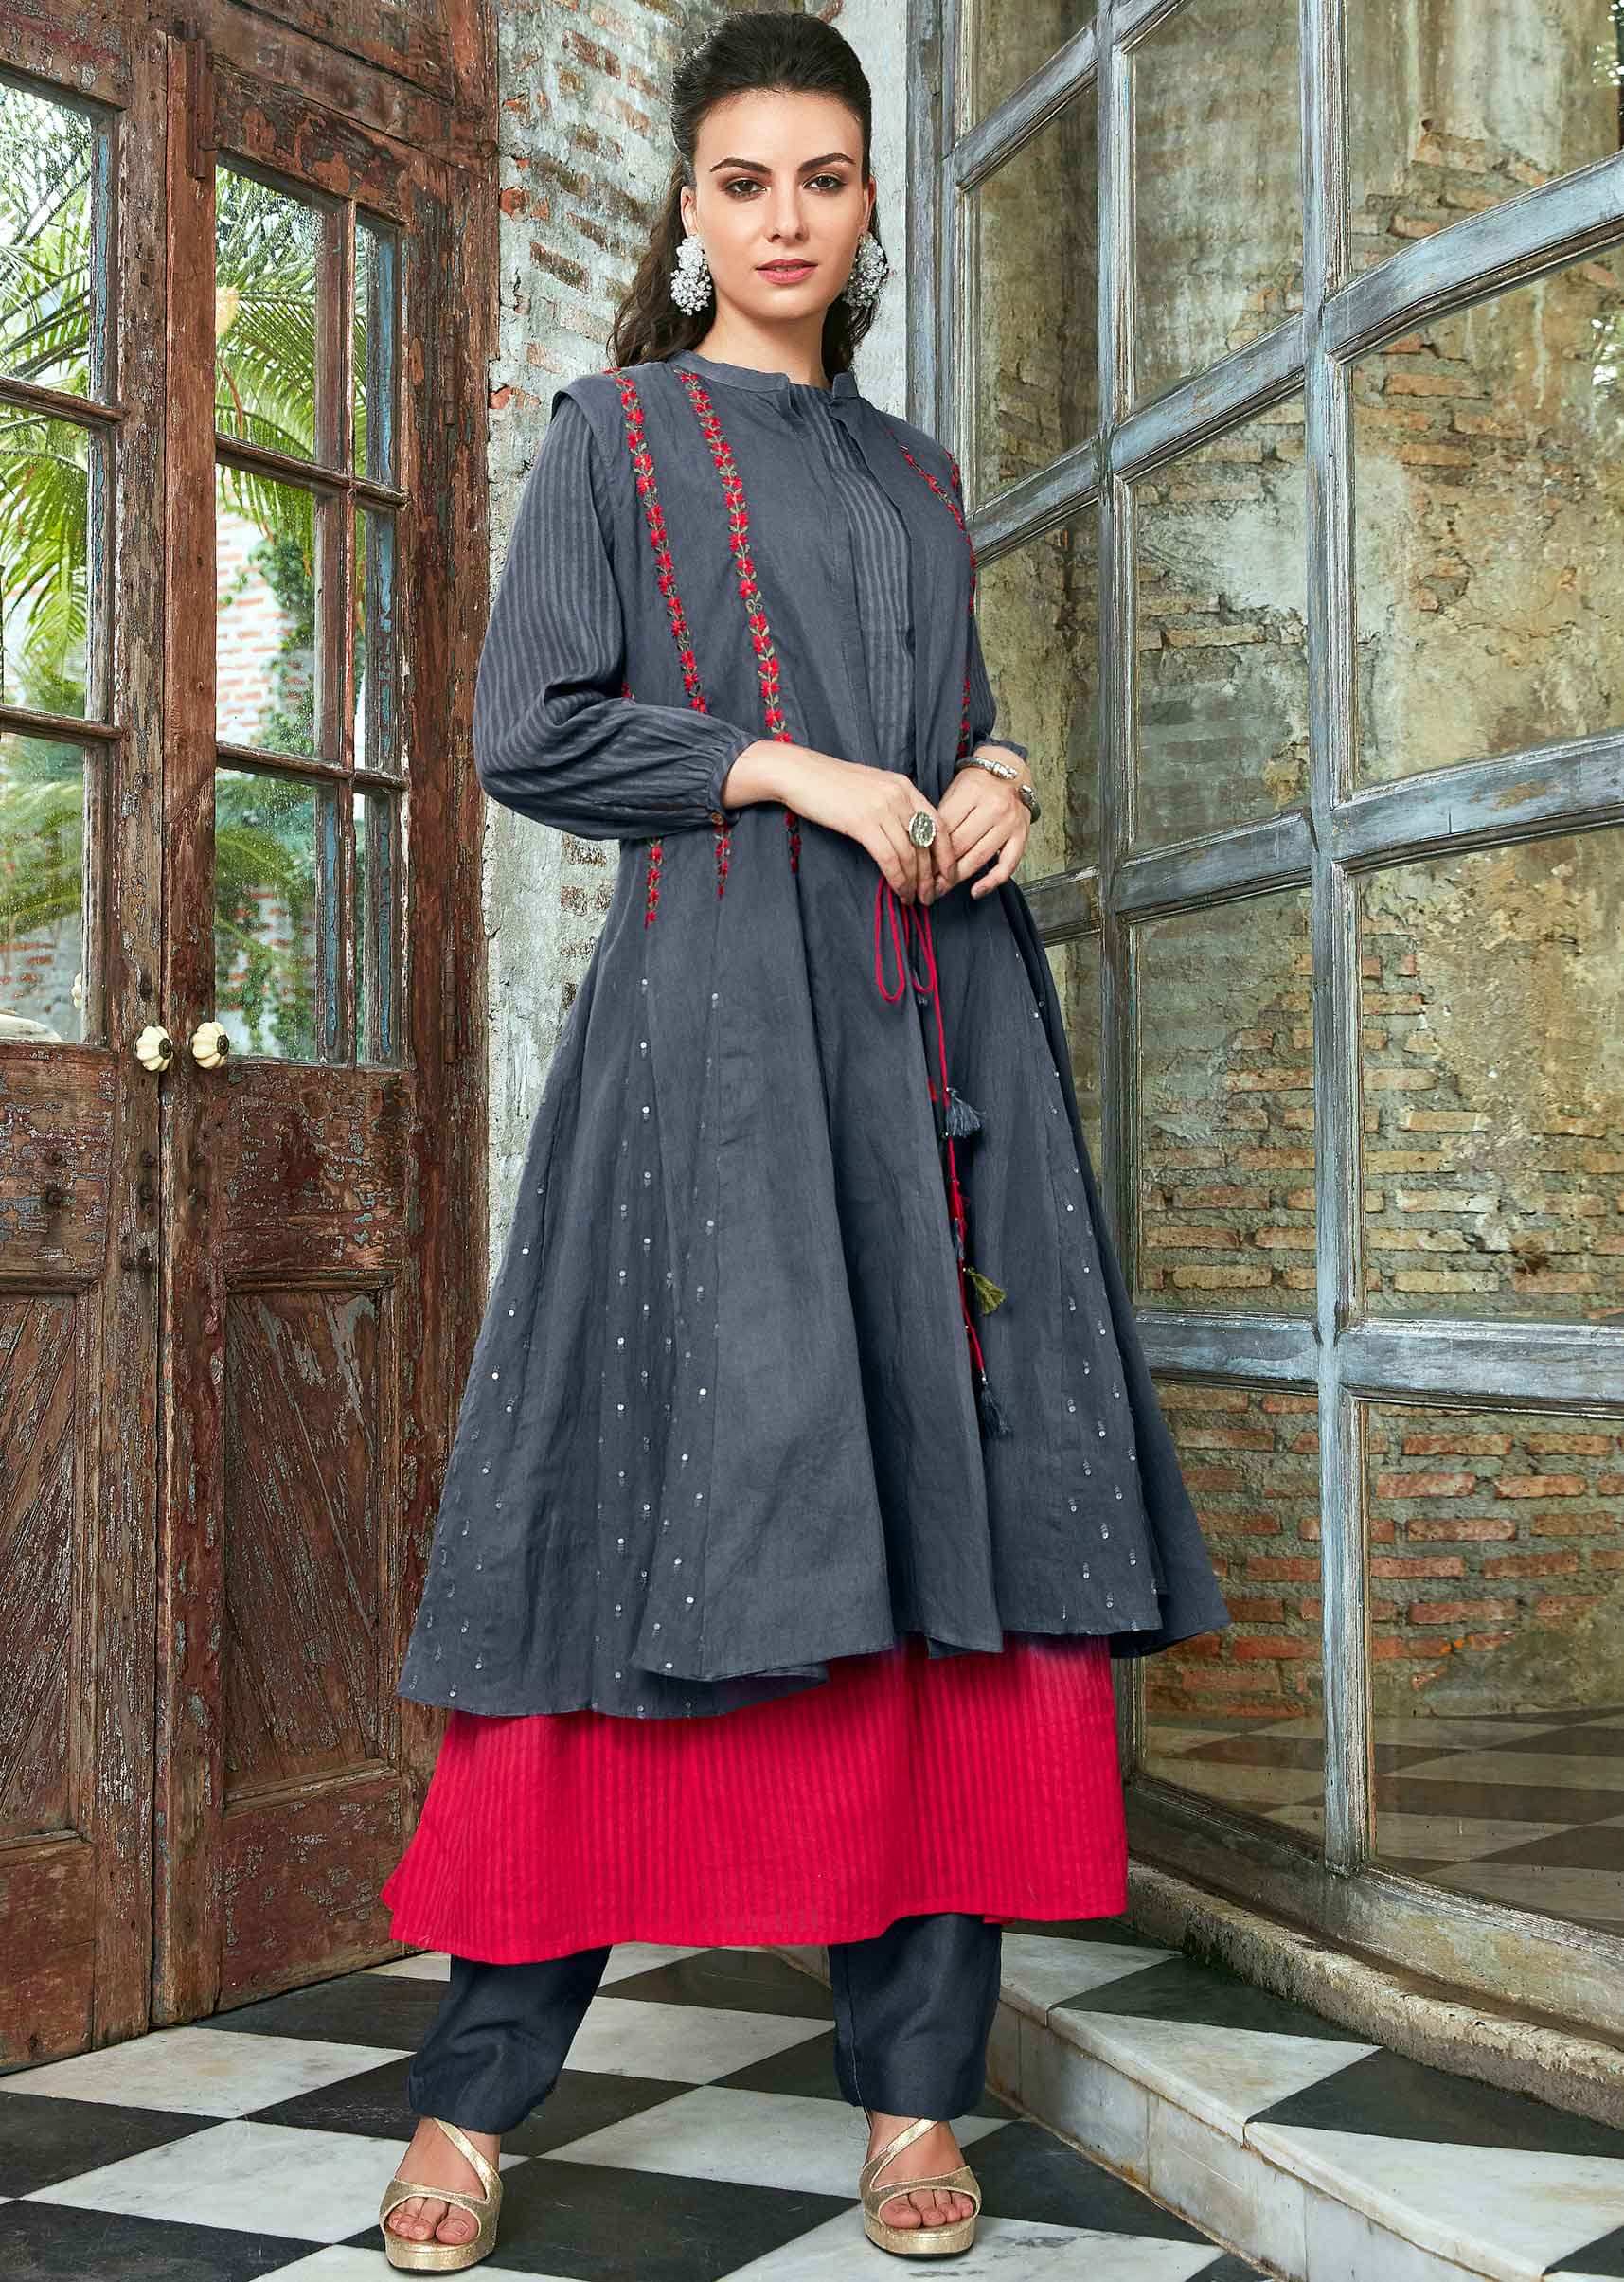 Double layer cotton kurti in shades of red and gre